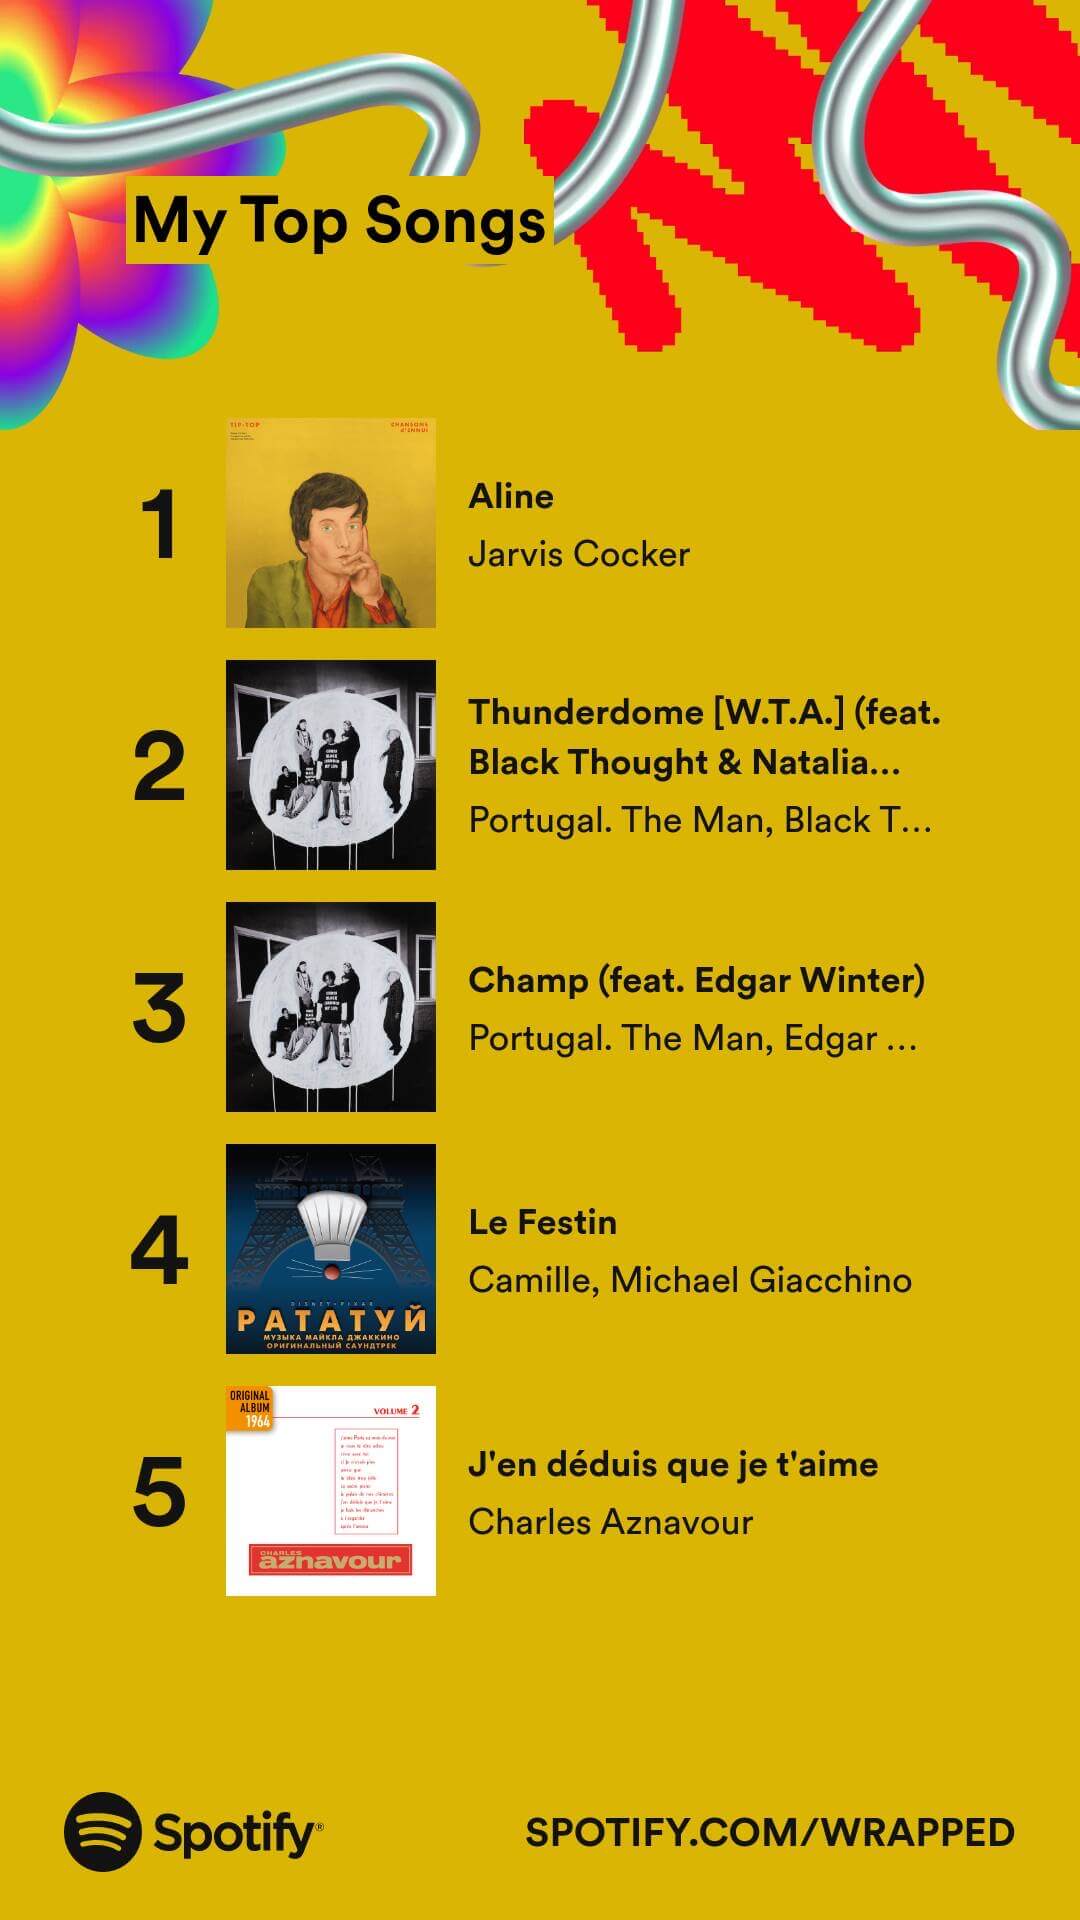 Top songs: Aline by Jarvis Cocker, Thunderdome and Champ by Portugal The Man, Le Festin by Camille, and the French song J'en deduis que je t'aime by Charles Aznavour.